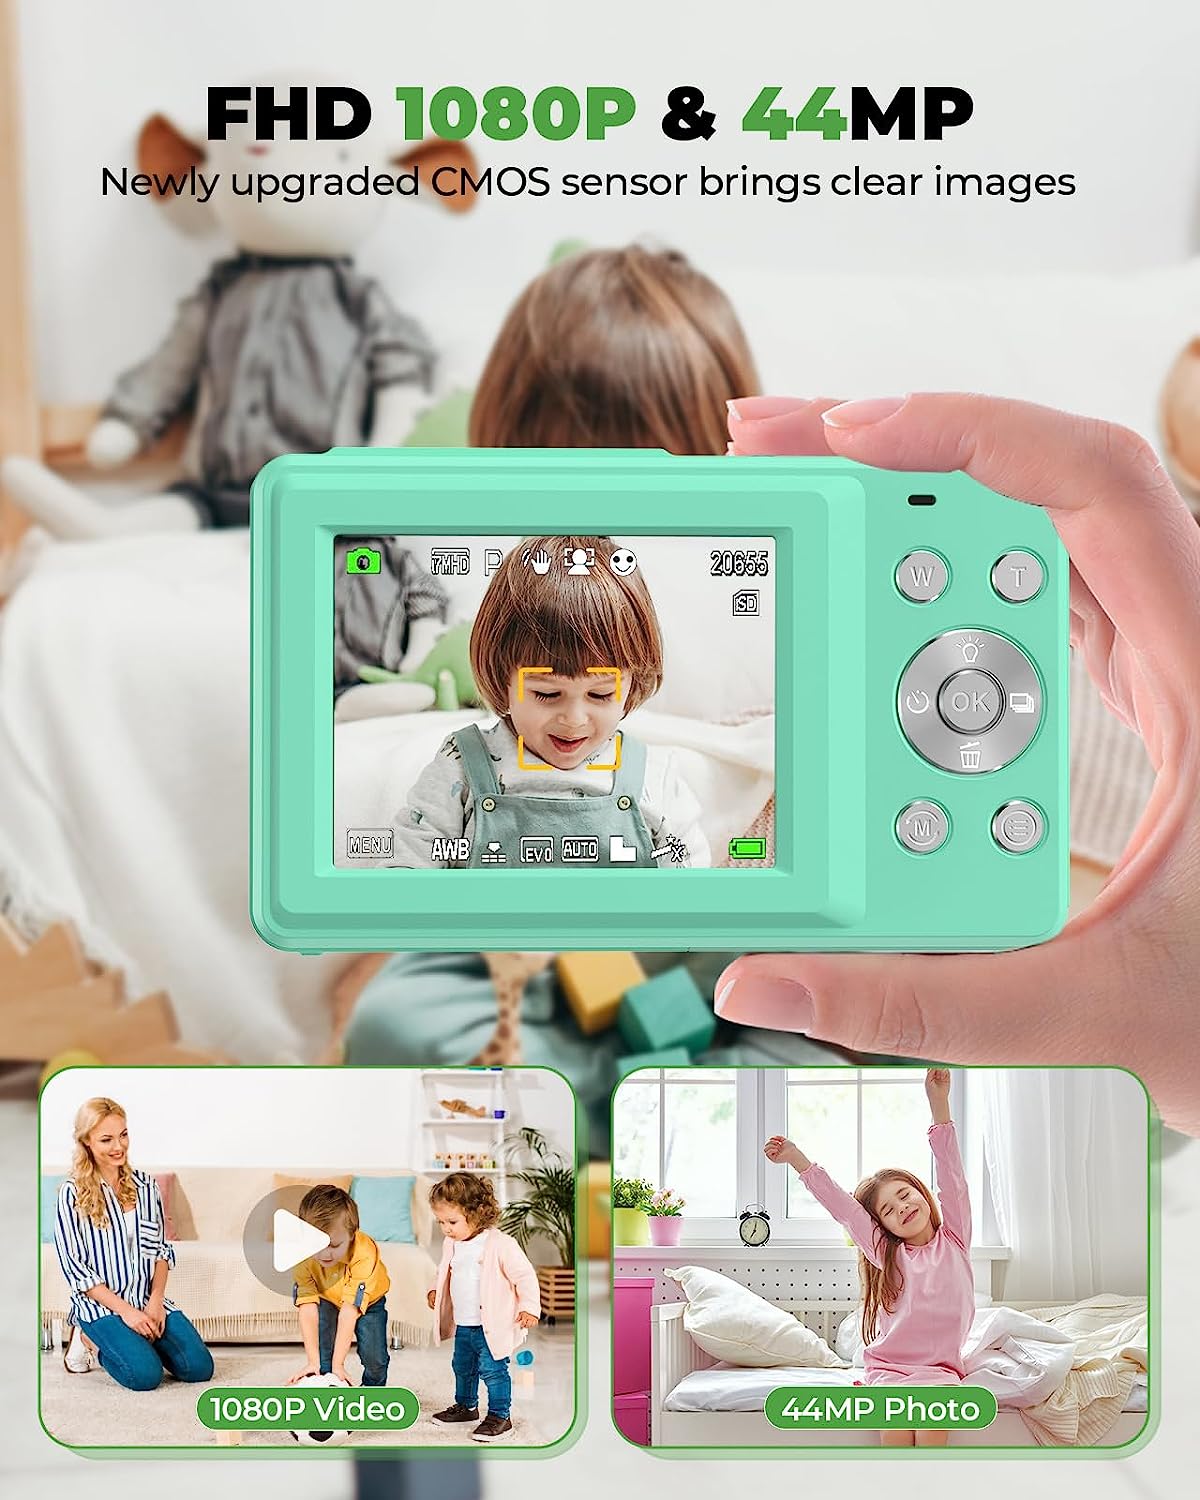 Digital Kids Camera with 32GB Card, Nsoela FHD 1080P 44MP Compact For Vlogging, Edge and Shoot 16X Zoom, Portable Mini Kids for Teens Students